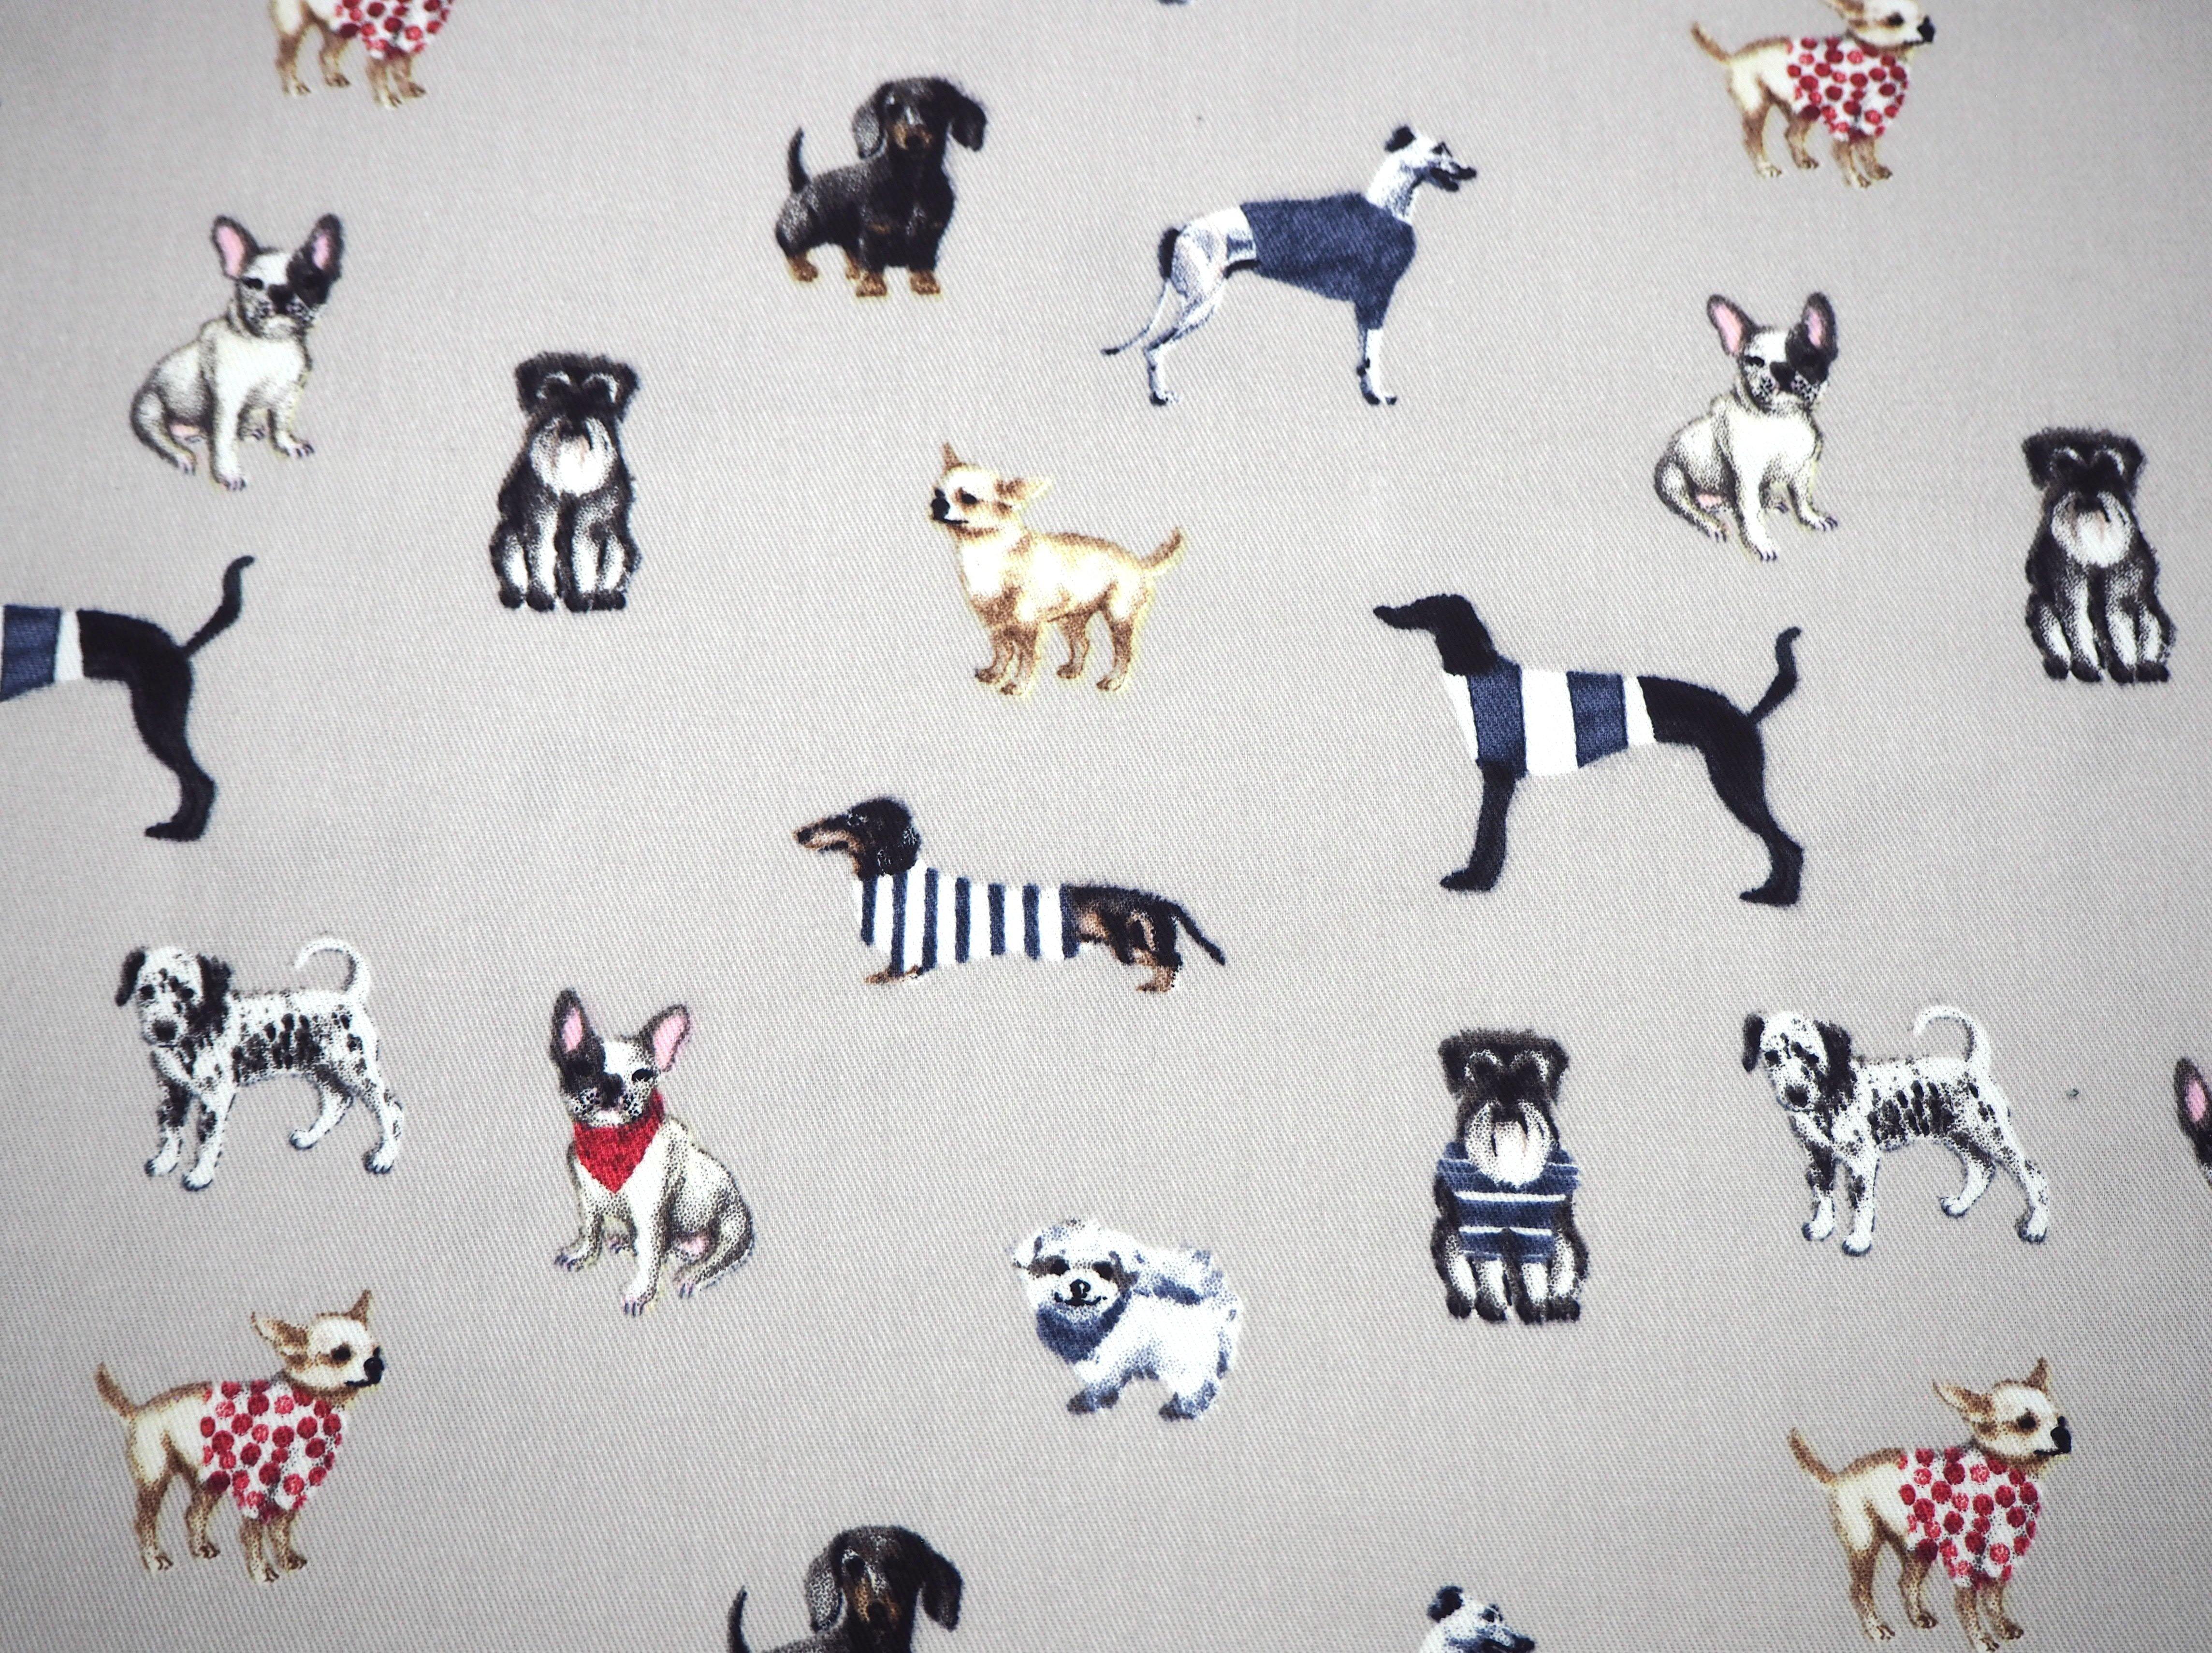 An assortment of Pampered Party Dogs wearing cute Jackets, 100% cotton fabric